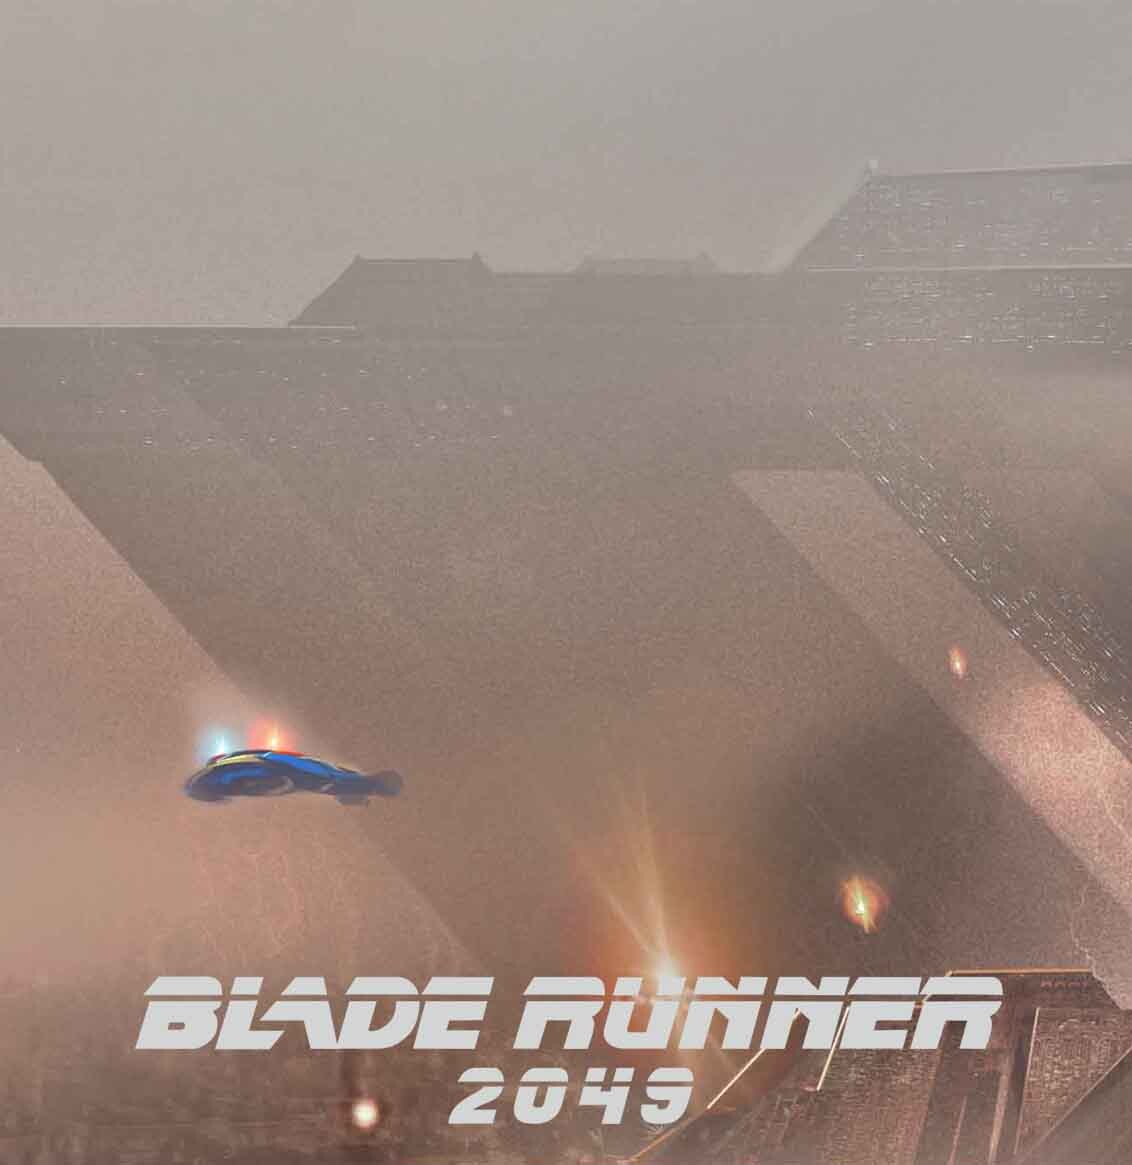 Bladerunner 2049: Wallace Building